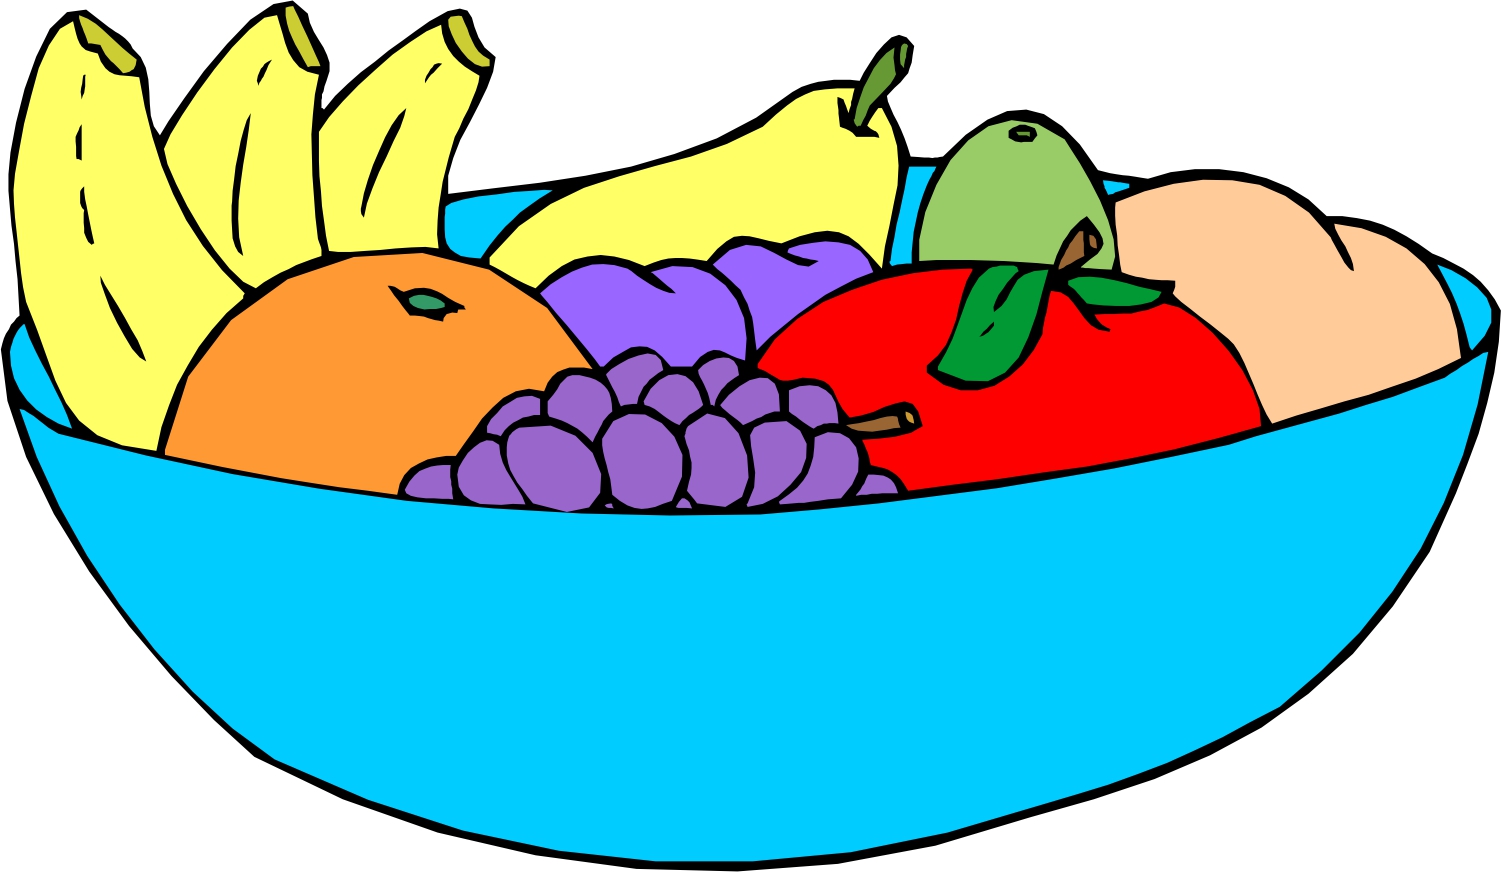 Bowl of fruit clipart